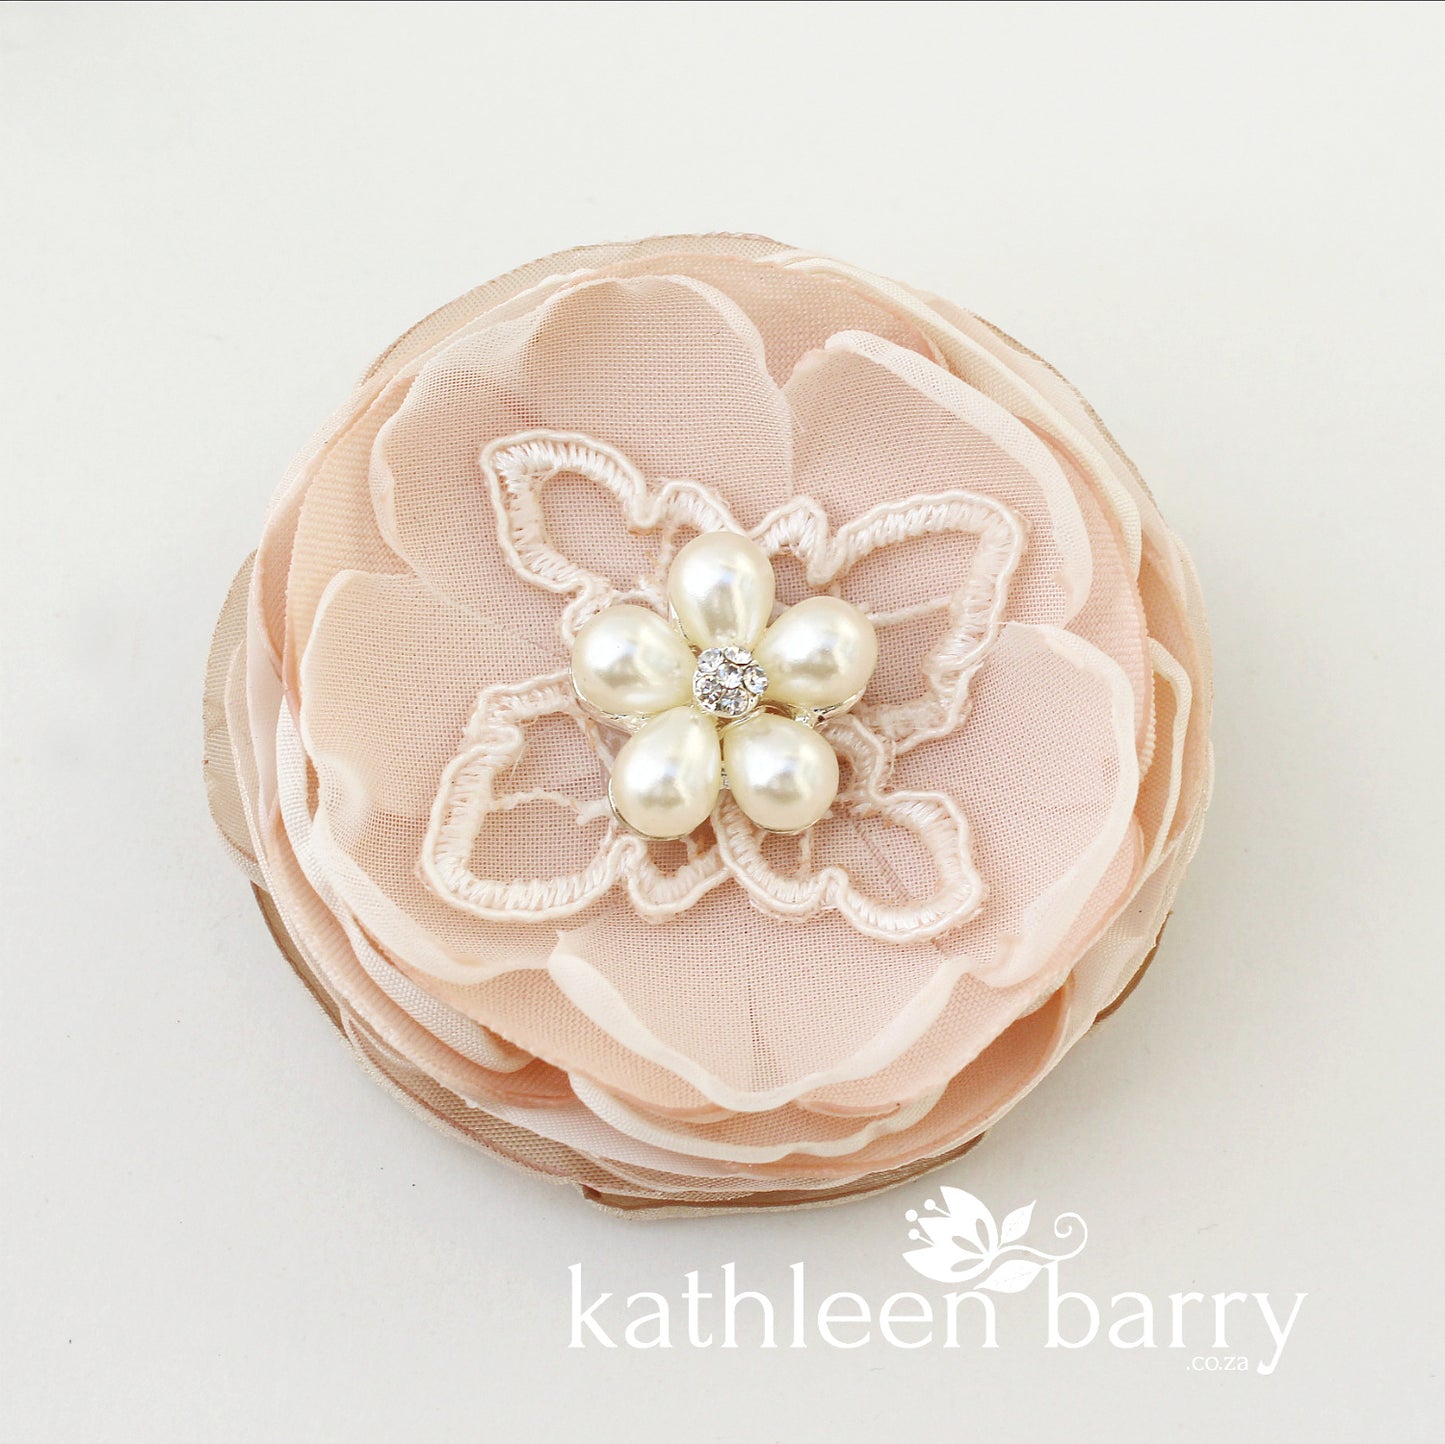 Blush pink hair flower or brooch - Bride, flower girl, bridesmaid, mother of the bride or groom gifts